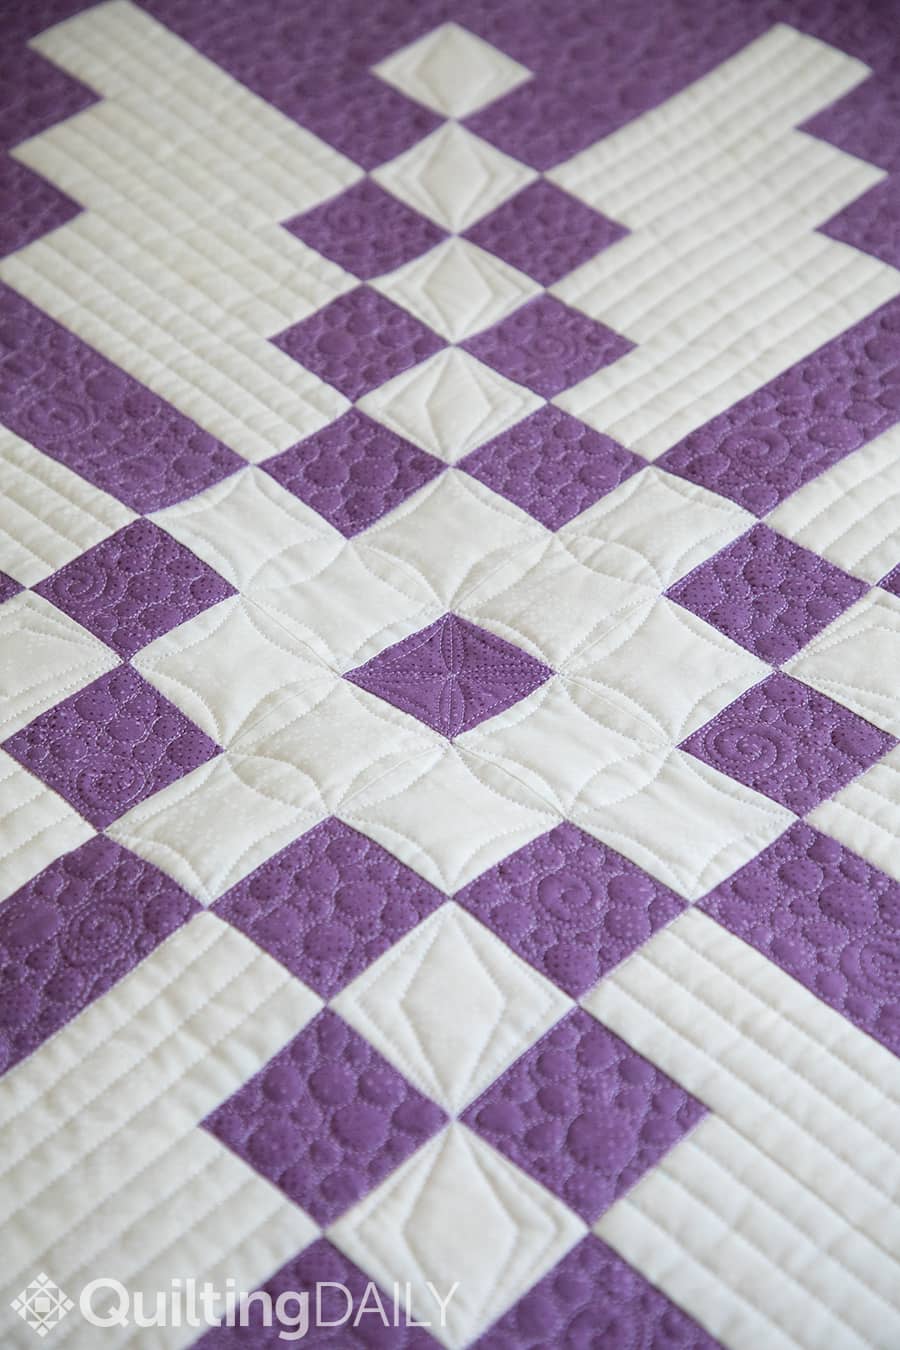 Free pattern: Snow Blossom - zoomed in image of quilt pattern